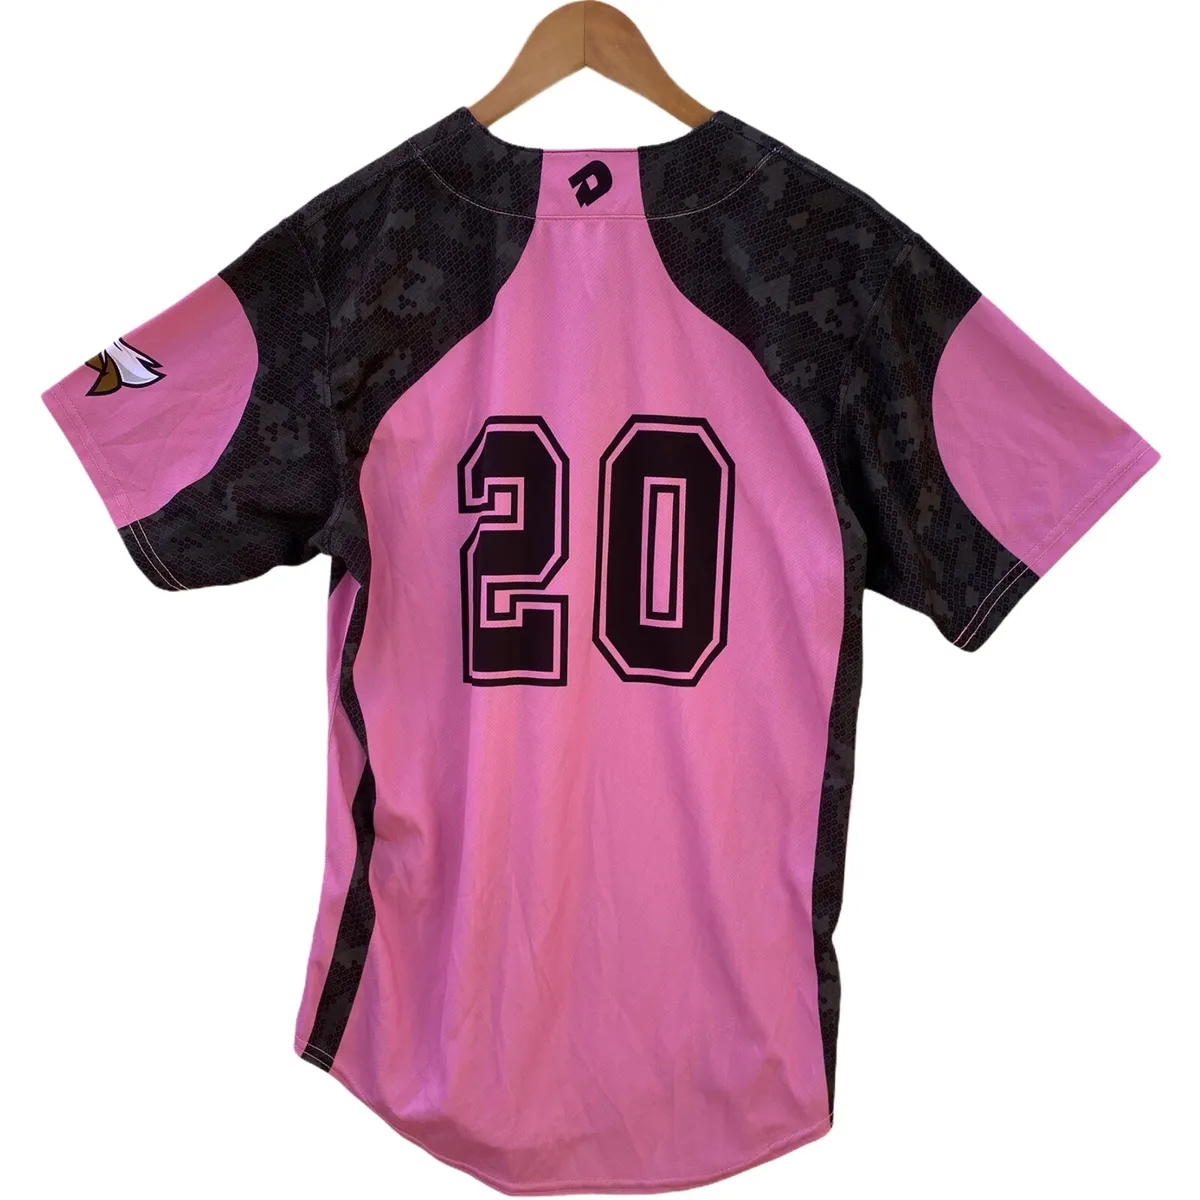 DeMarini Womens Jersey Size Large Pink Eagles #20 One Button Polyester NWOT